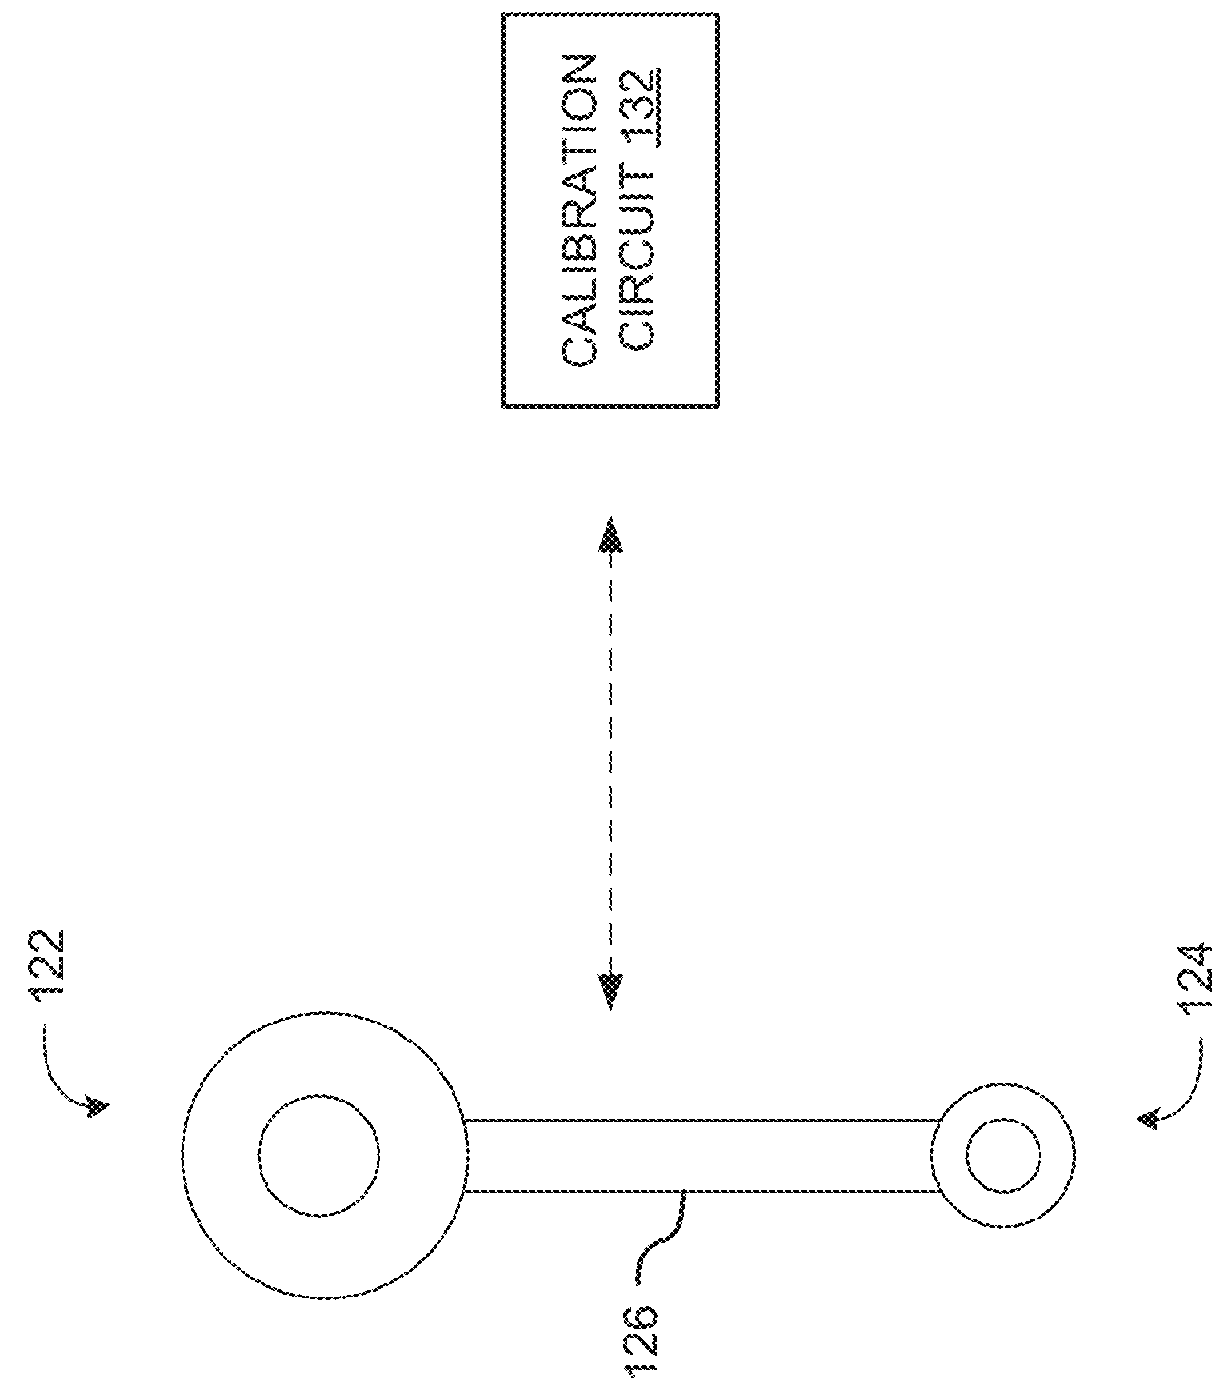 Systems and methods for in-field stereocamera calibration